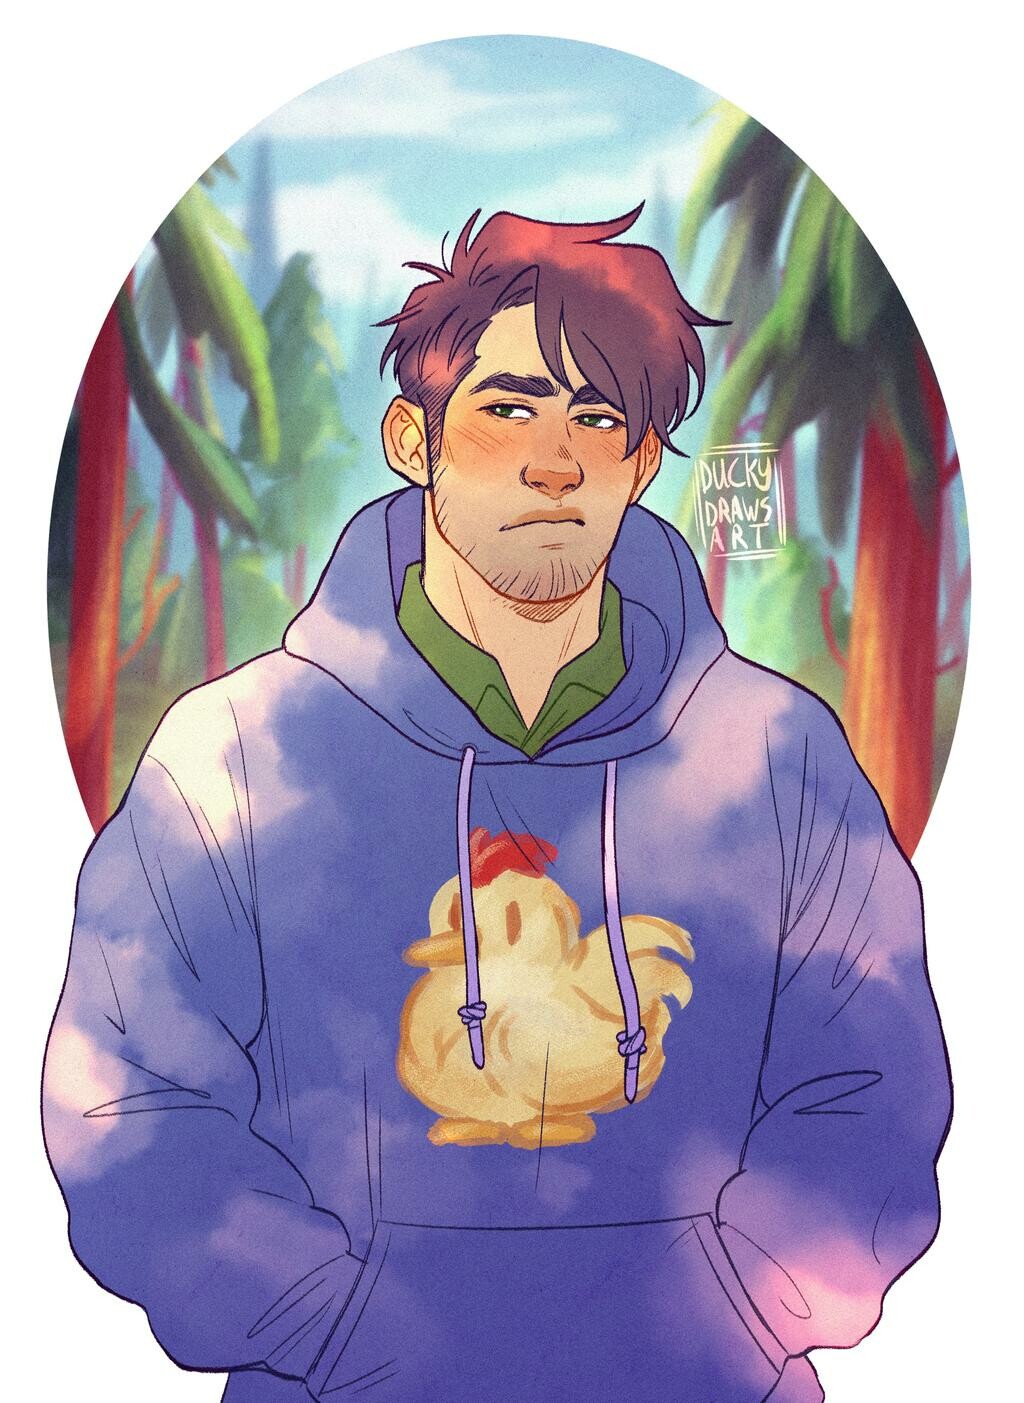 Stardew Valley Drawing / Stardew valley is very deep when it comes to